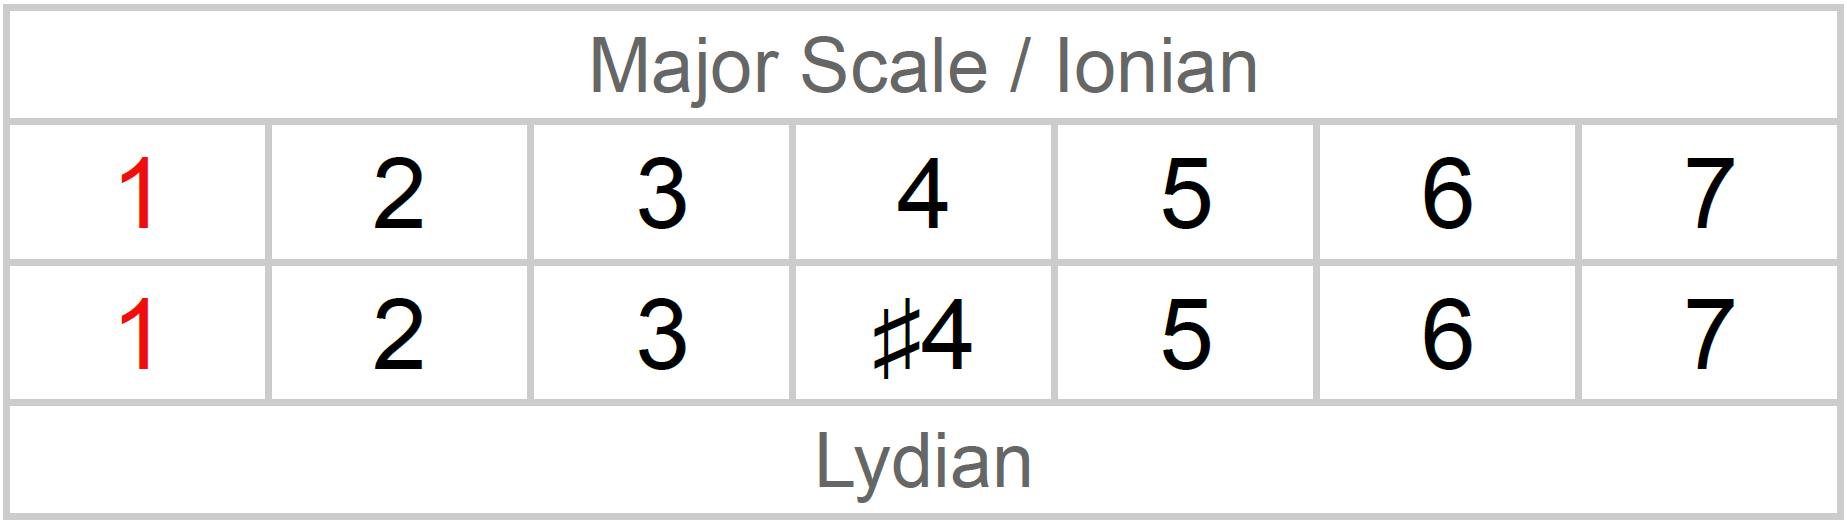 Musical Scale Info: A minor lydian